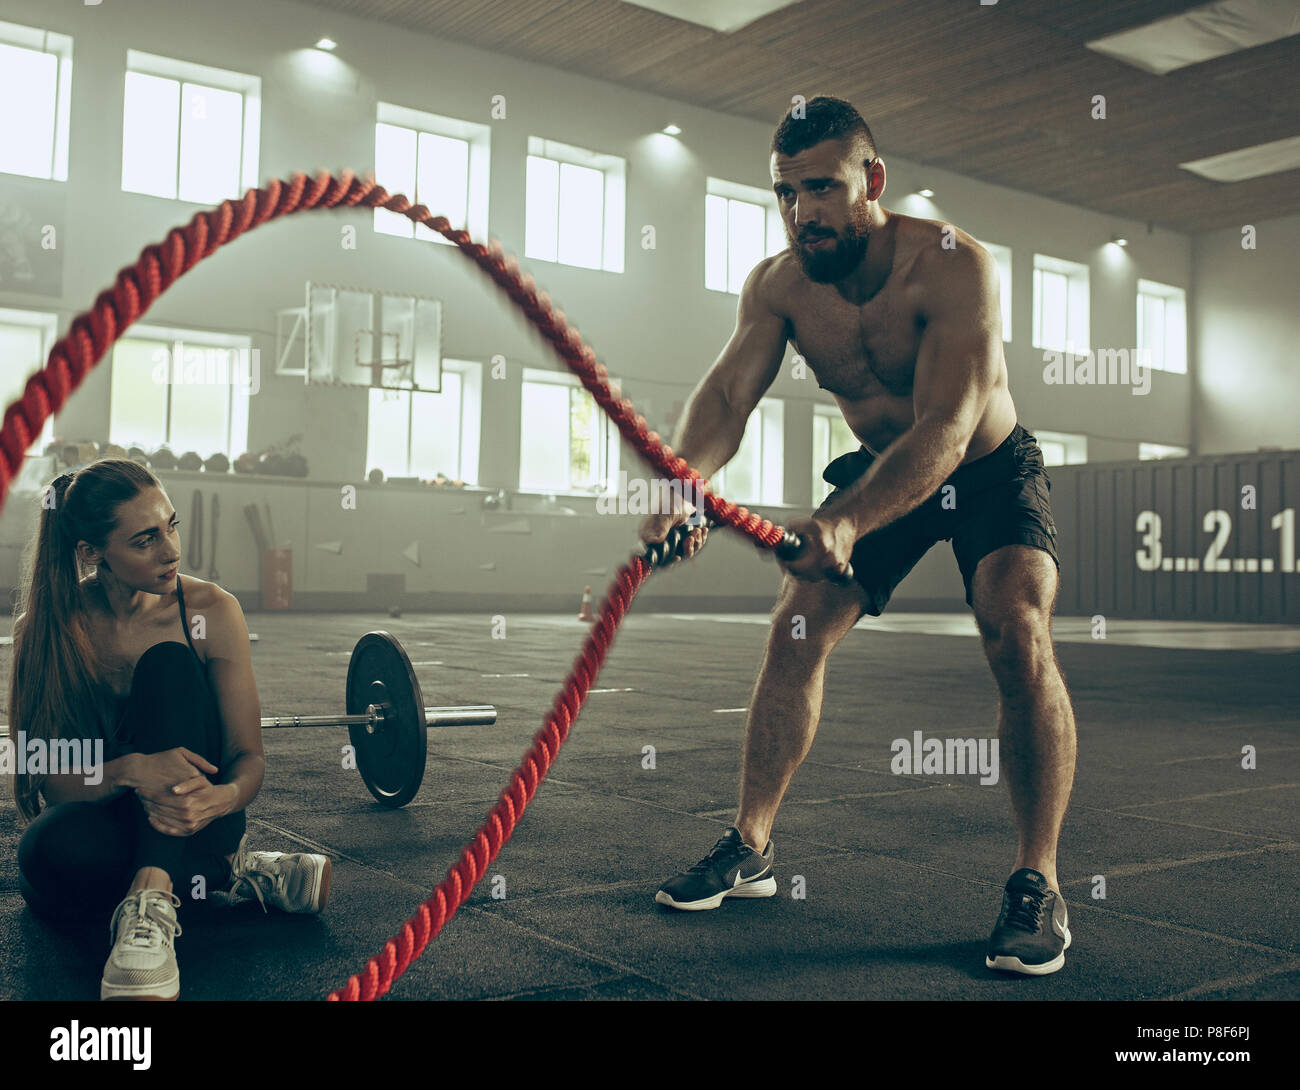 Men with battle rope battle ropes exercise in the fitness gym Stock Photo -  Alamy